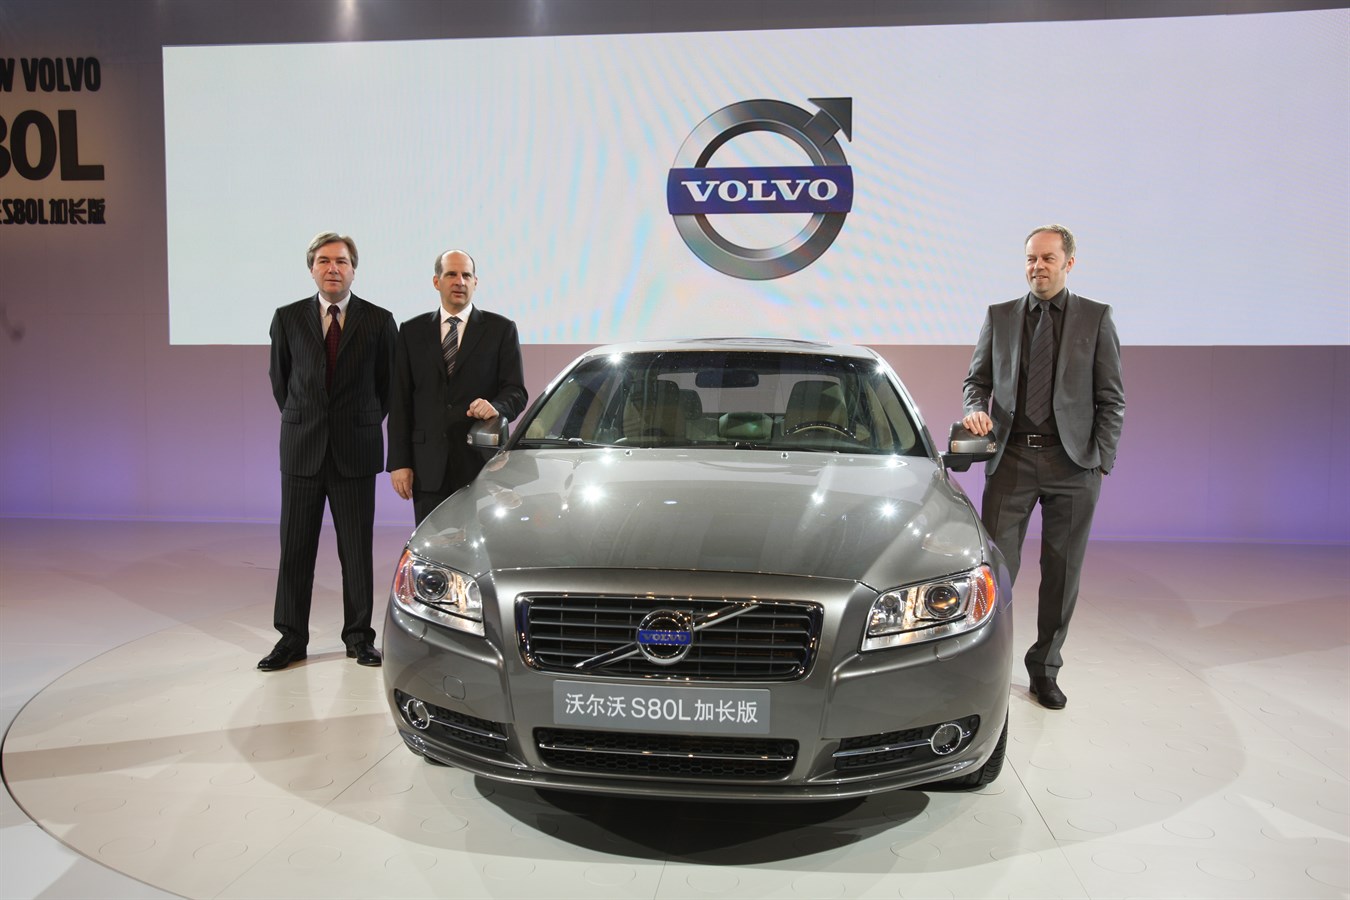 Volvo S80L - long wheel based car produced in China for the Chinese market, launched in Beijing